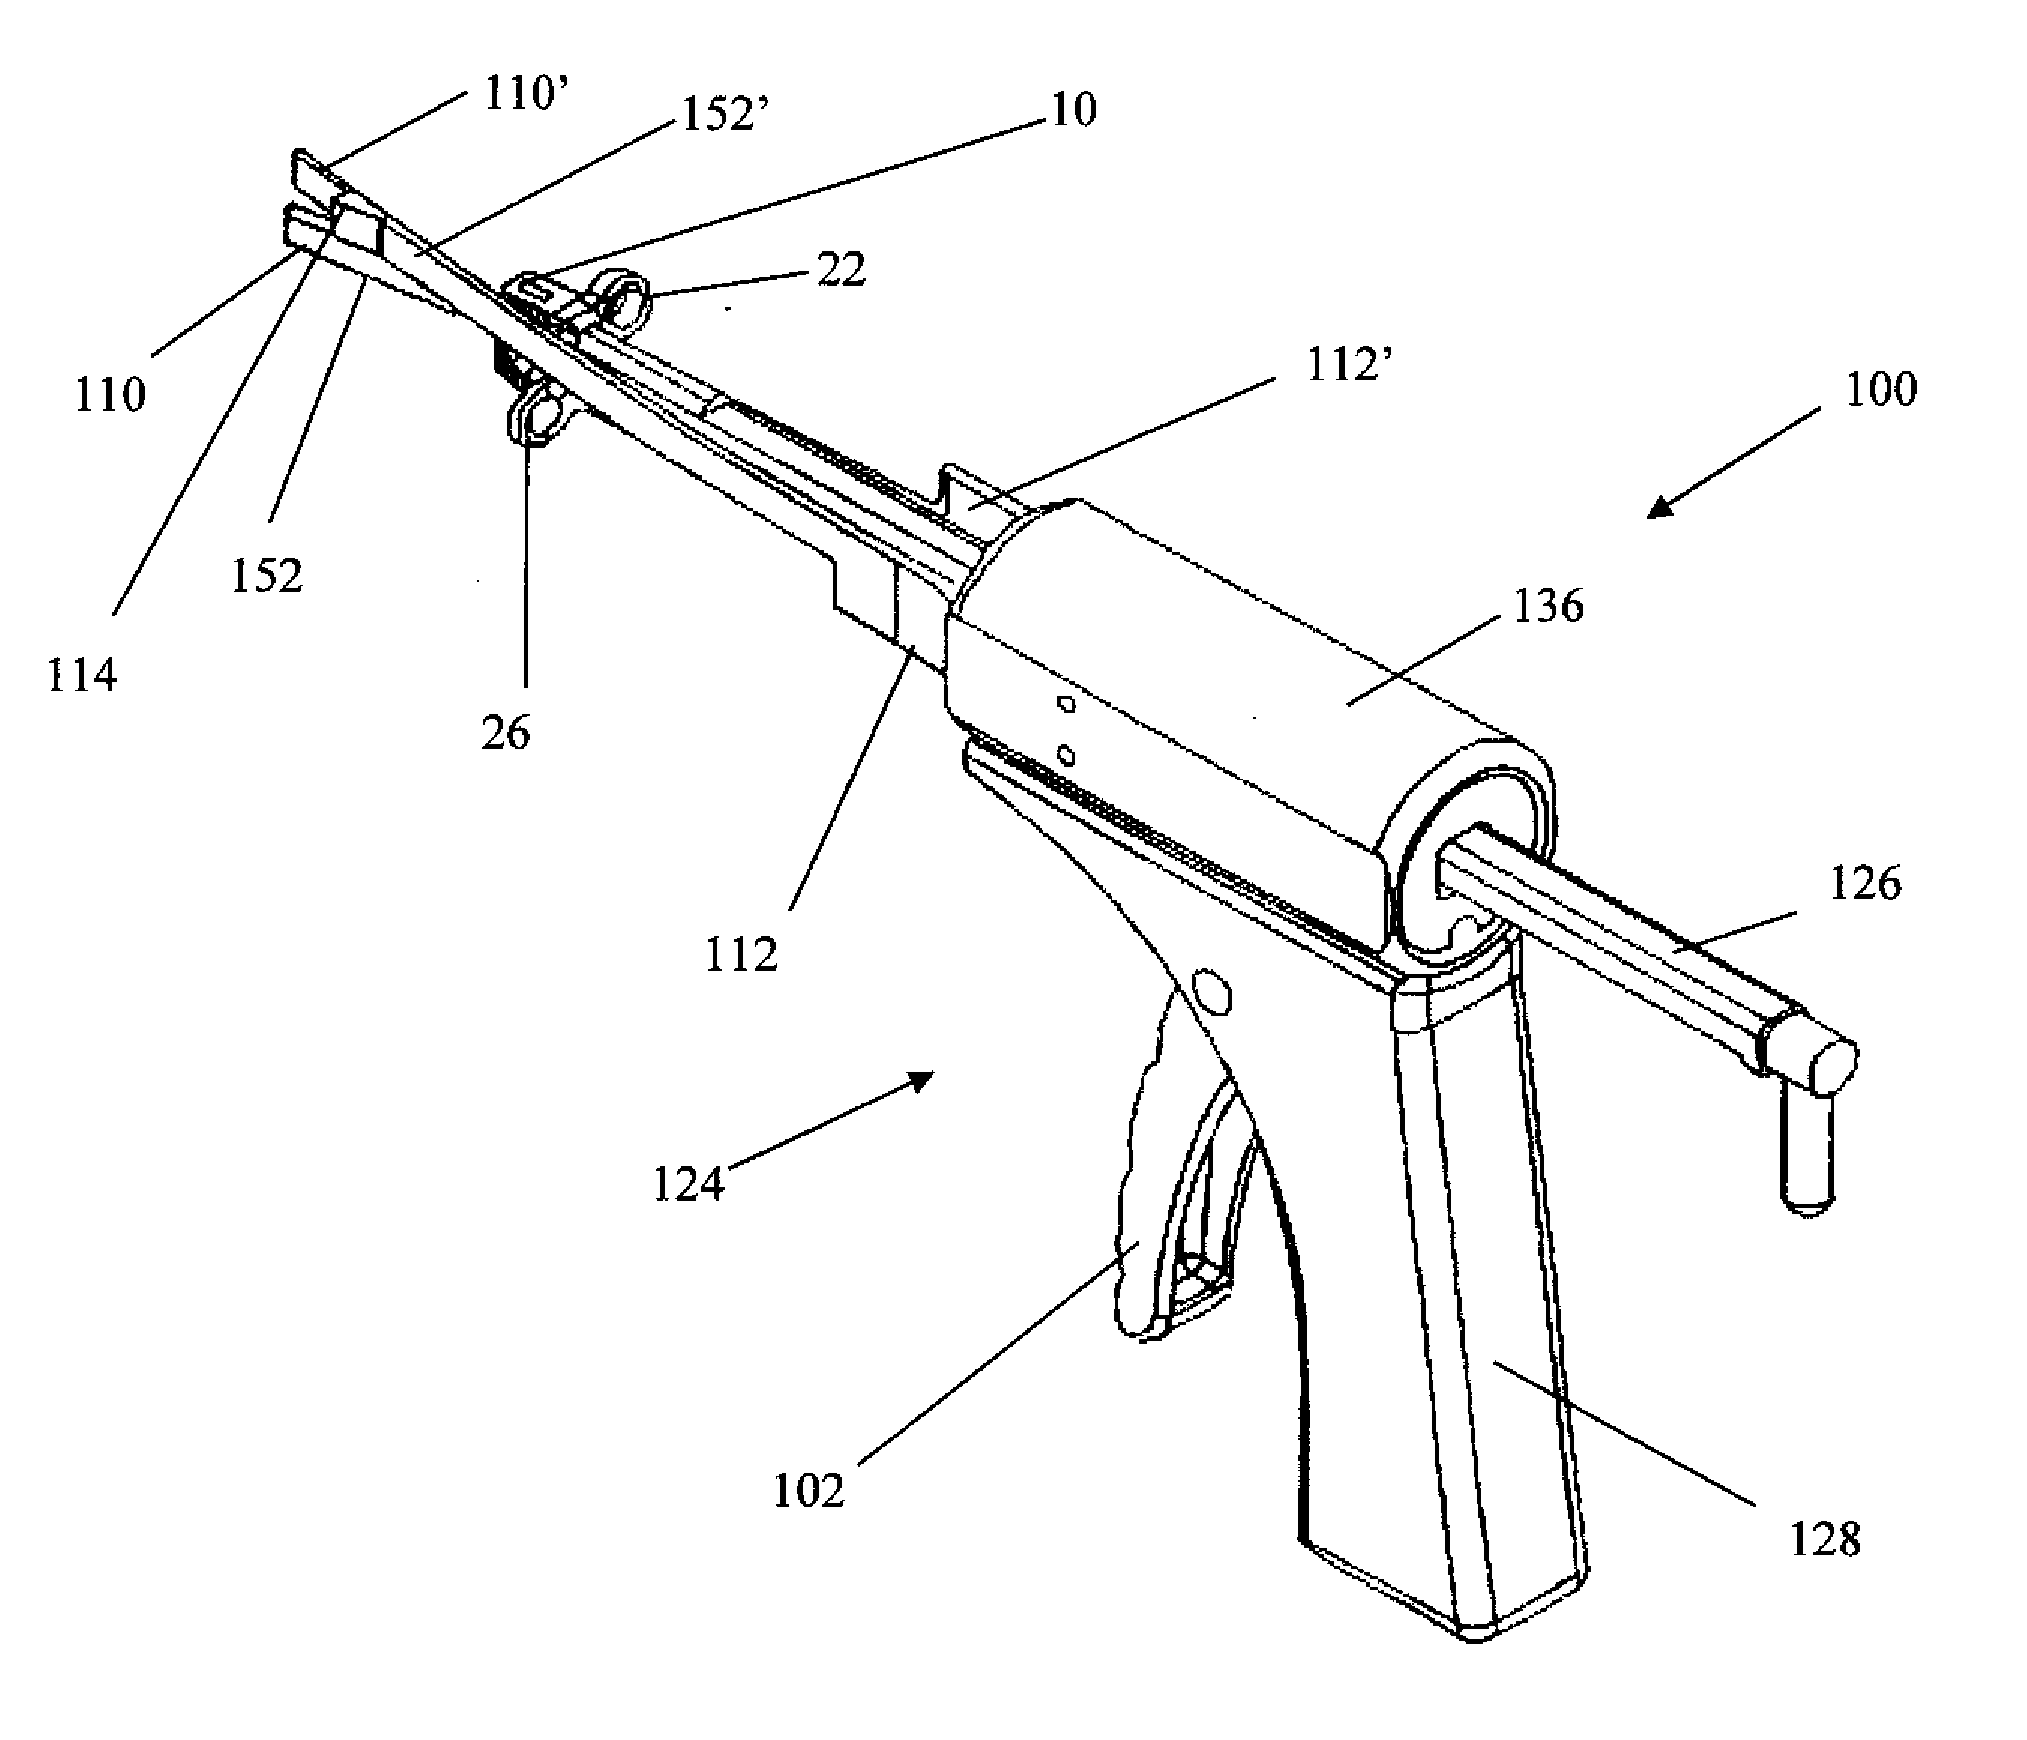 Offset opposing arm spinal implant distractor/inserter